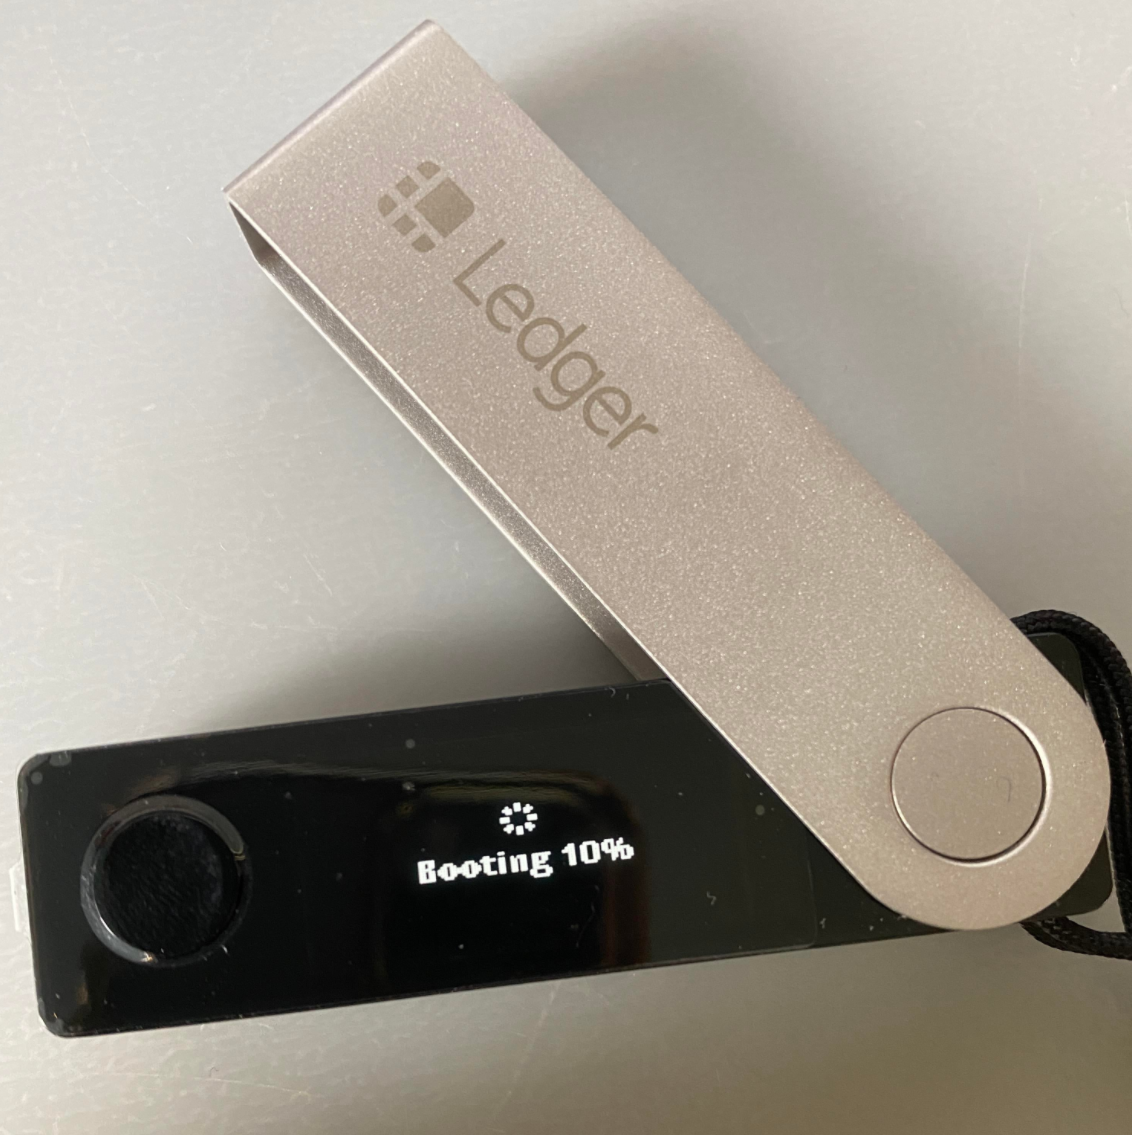 Ledger get stuck on “waiting commands” - Community Technical Support - Cardano Forum